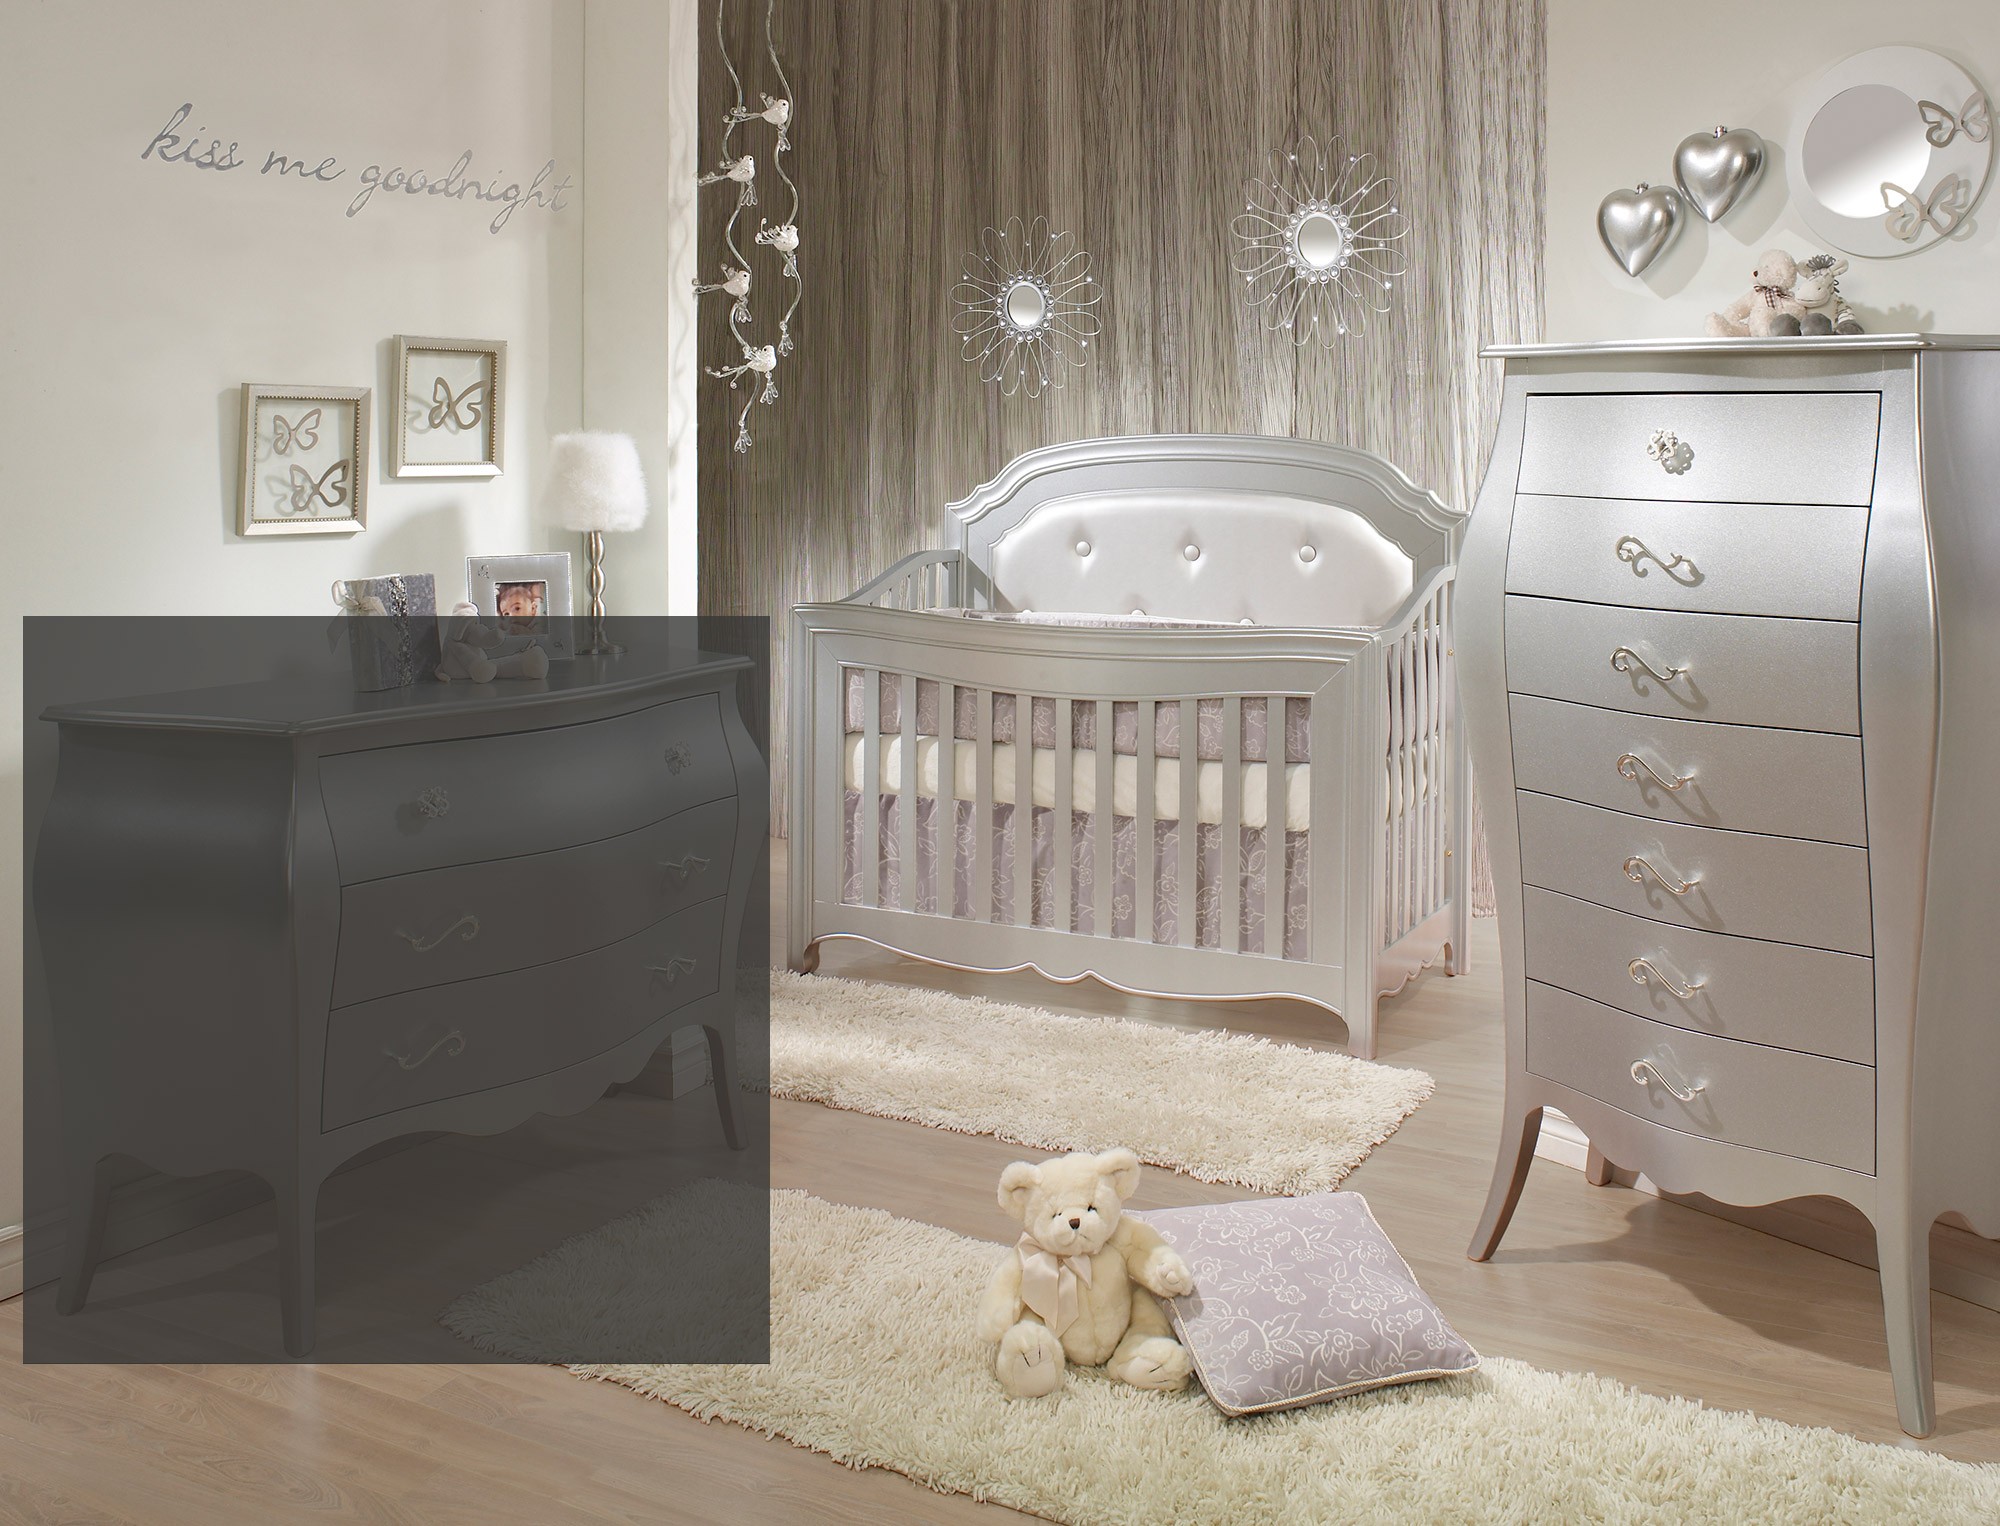 Room With Furniture Nursery Room With Lingerie Dresser Furniture With Unique Shaped In Touch Furniture  Pretty Lingerie Dresser For Keeping Women’s Secret 